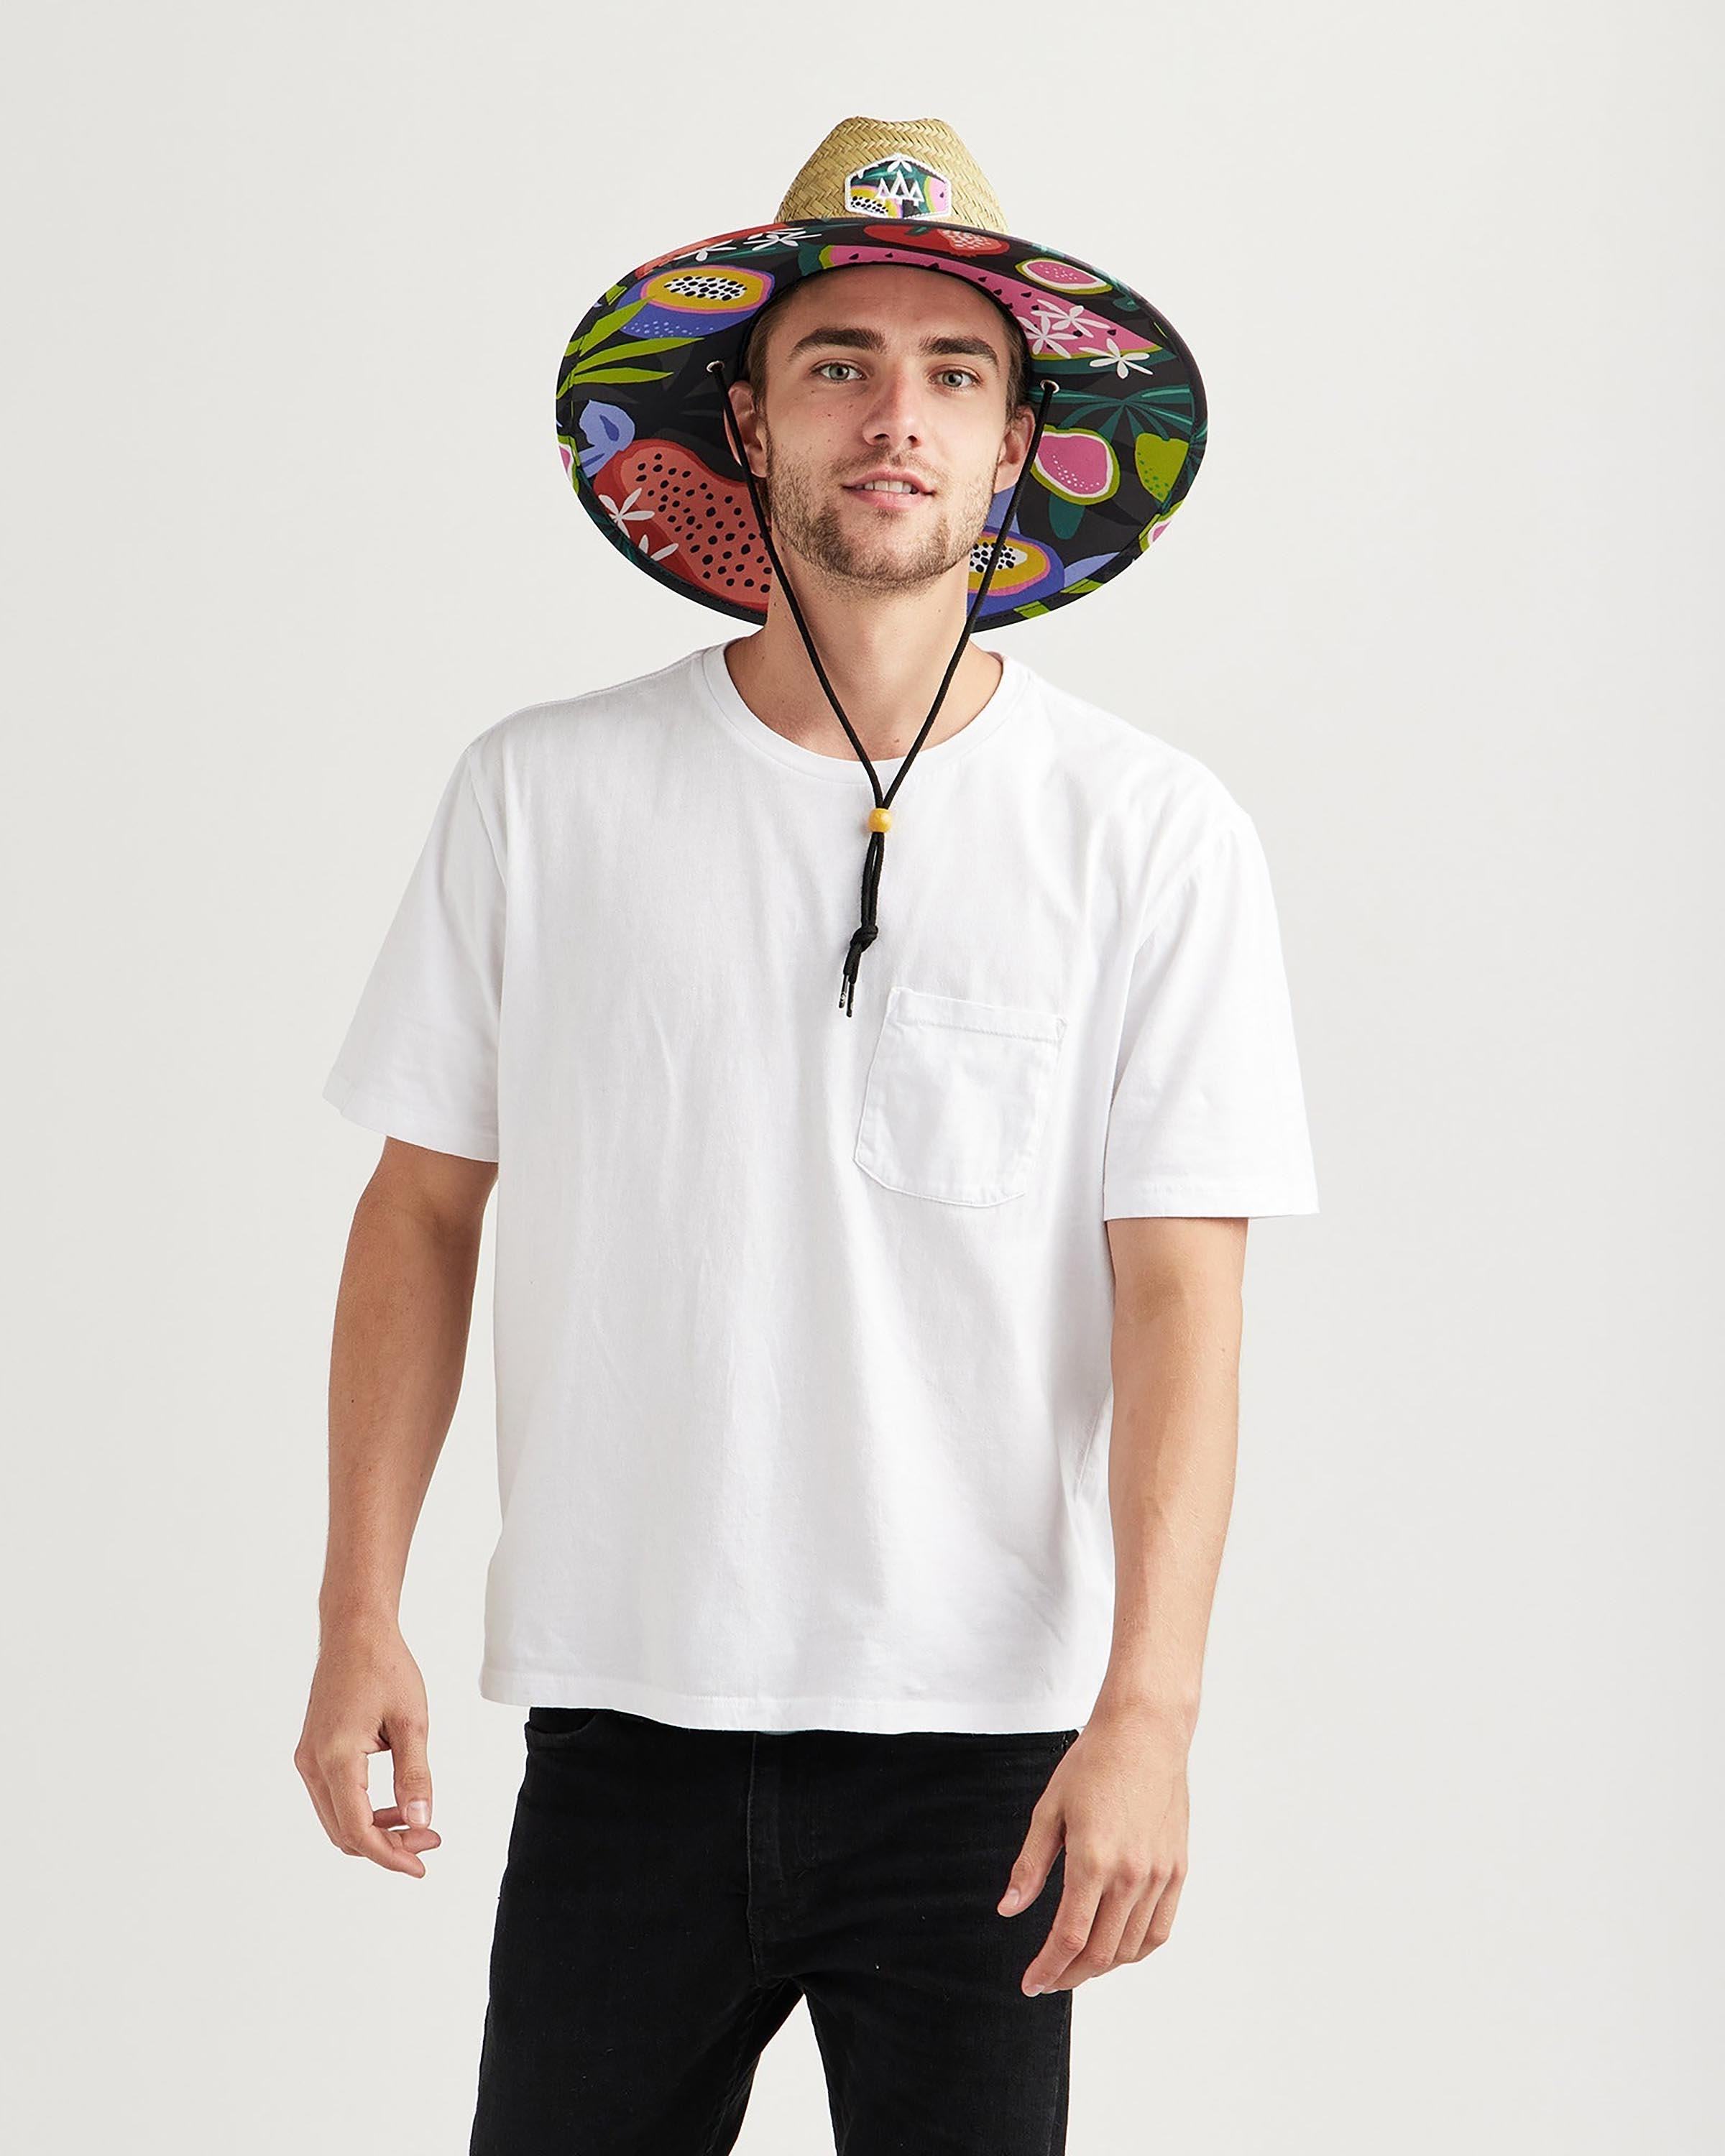 Blend - undefined - Hemlock Hat Co. Lifeguards - Adults